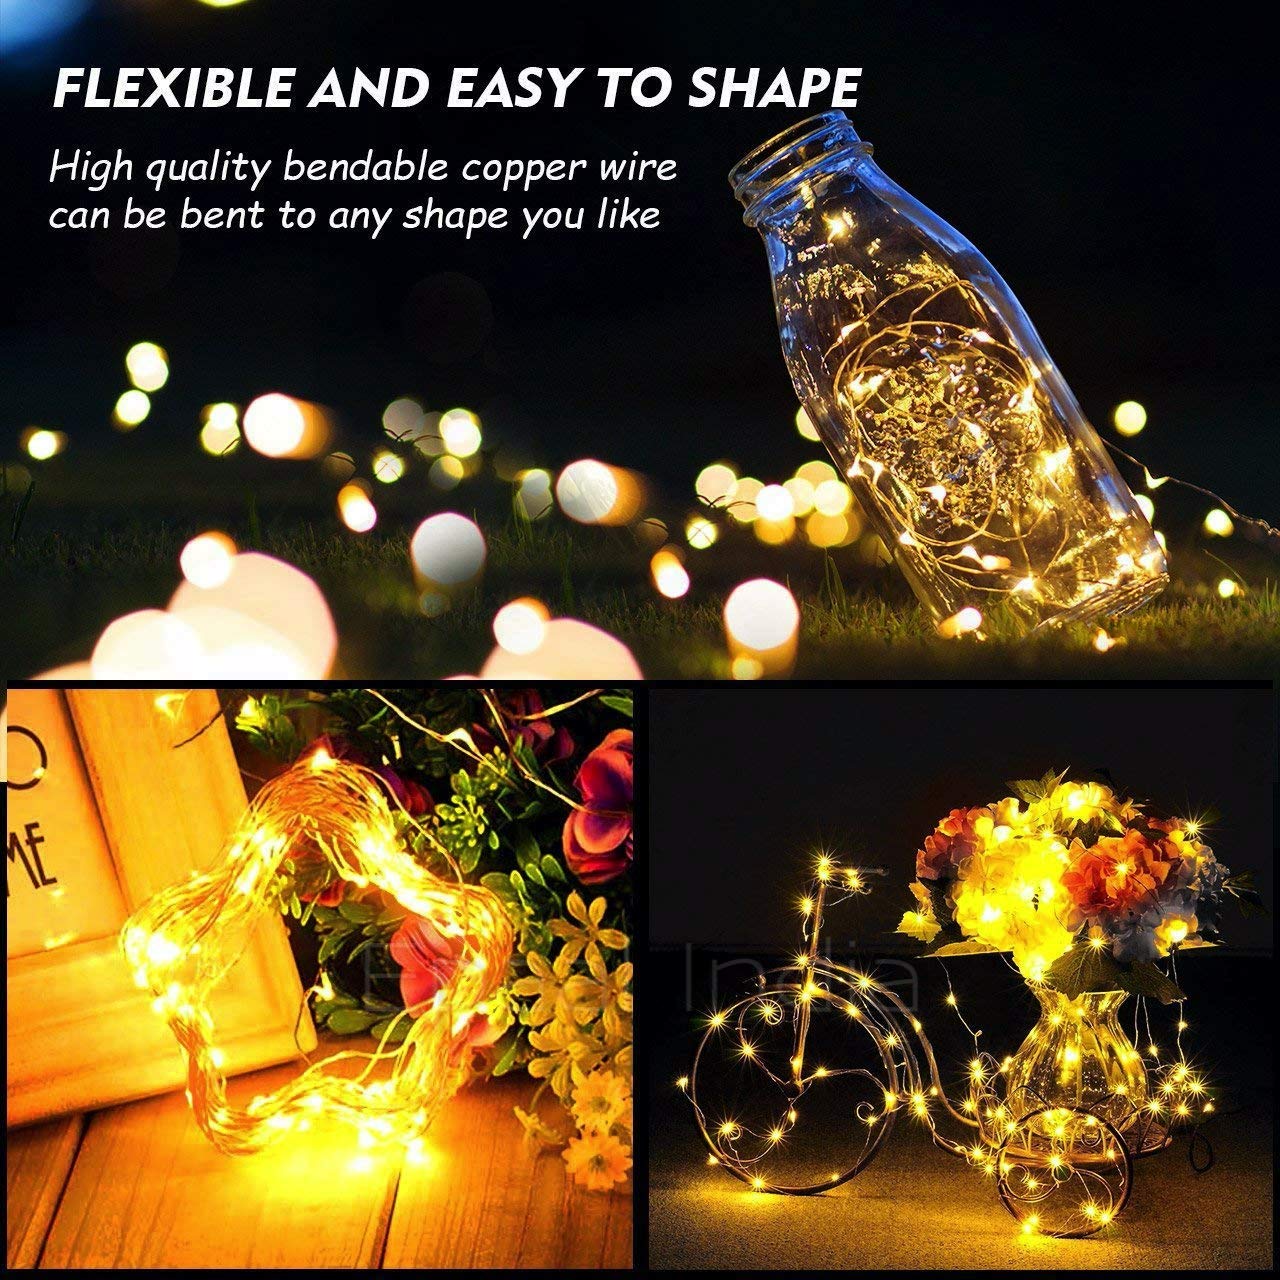 Epaal® LED String Lights, Fairy, Starry Lights Silver Copper Wire Waterproof Decorative Lights (Warm White, USB Powered - 10 Meters (100 LEDs))